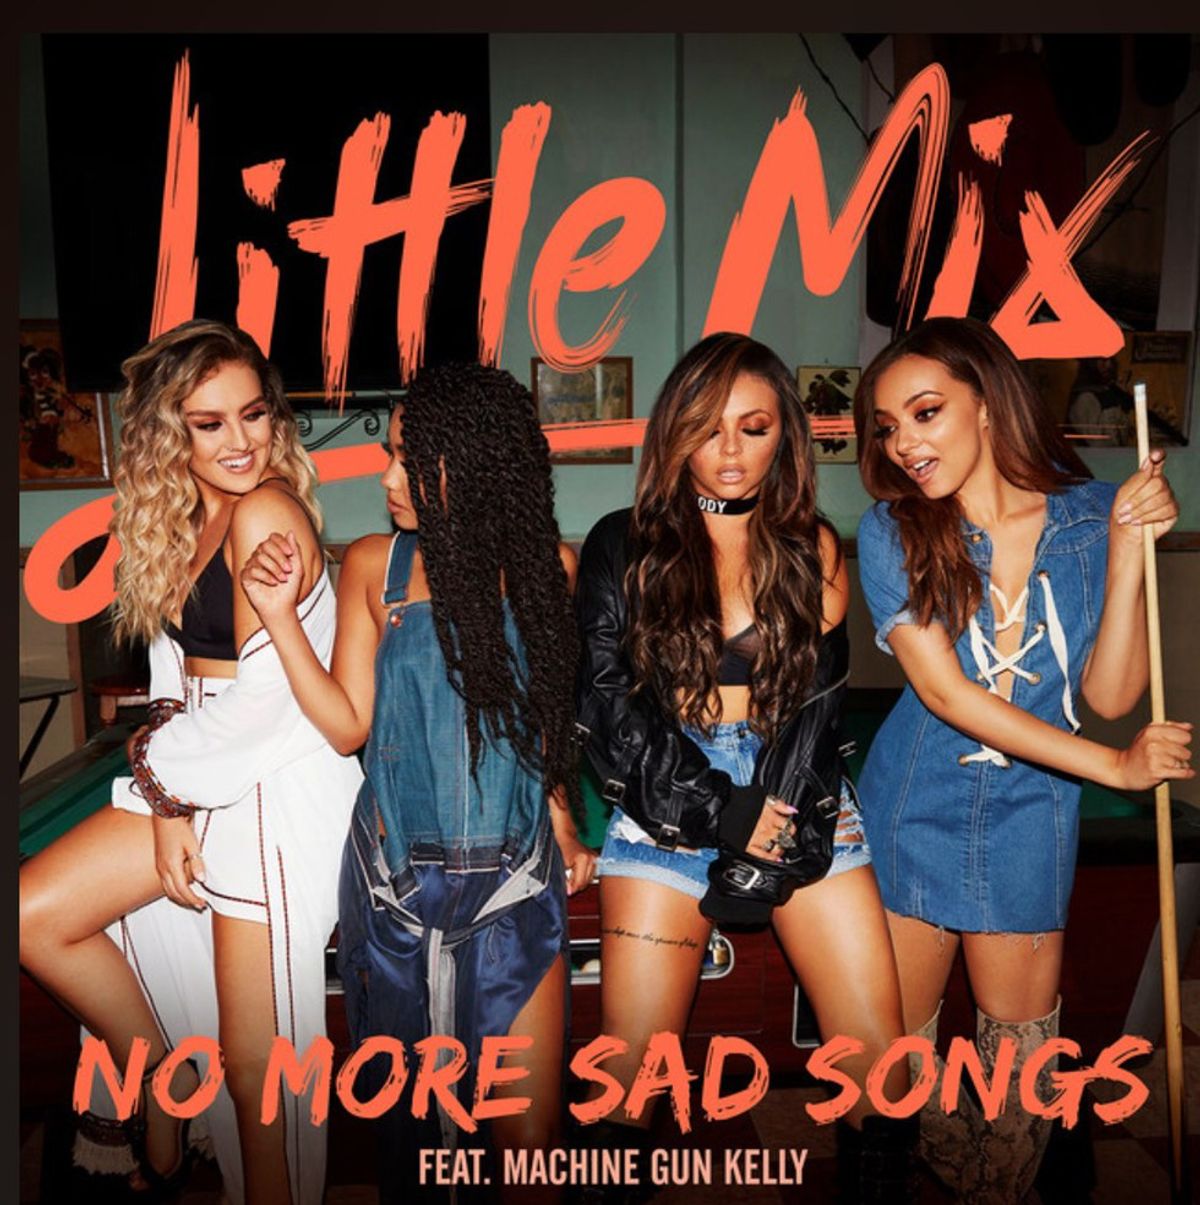 Get Lost In The Music With Little Mix's "No More Sad Songs"